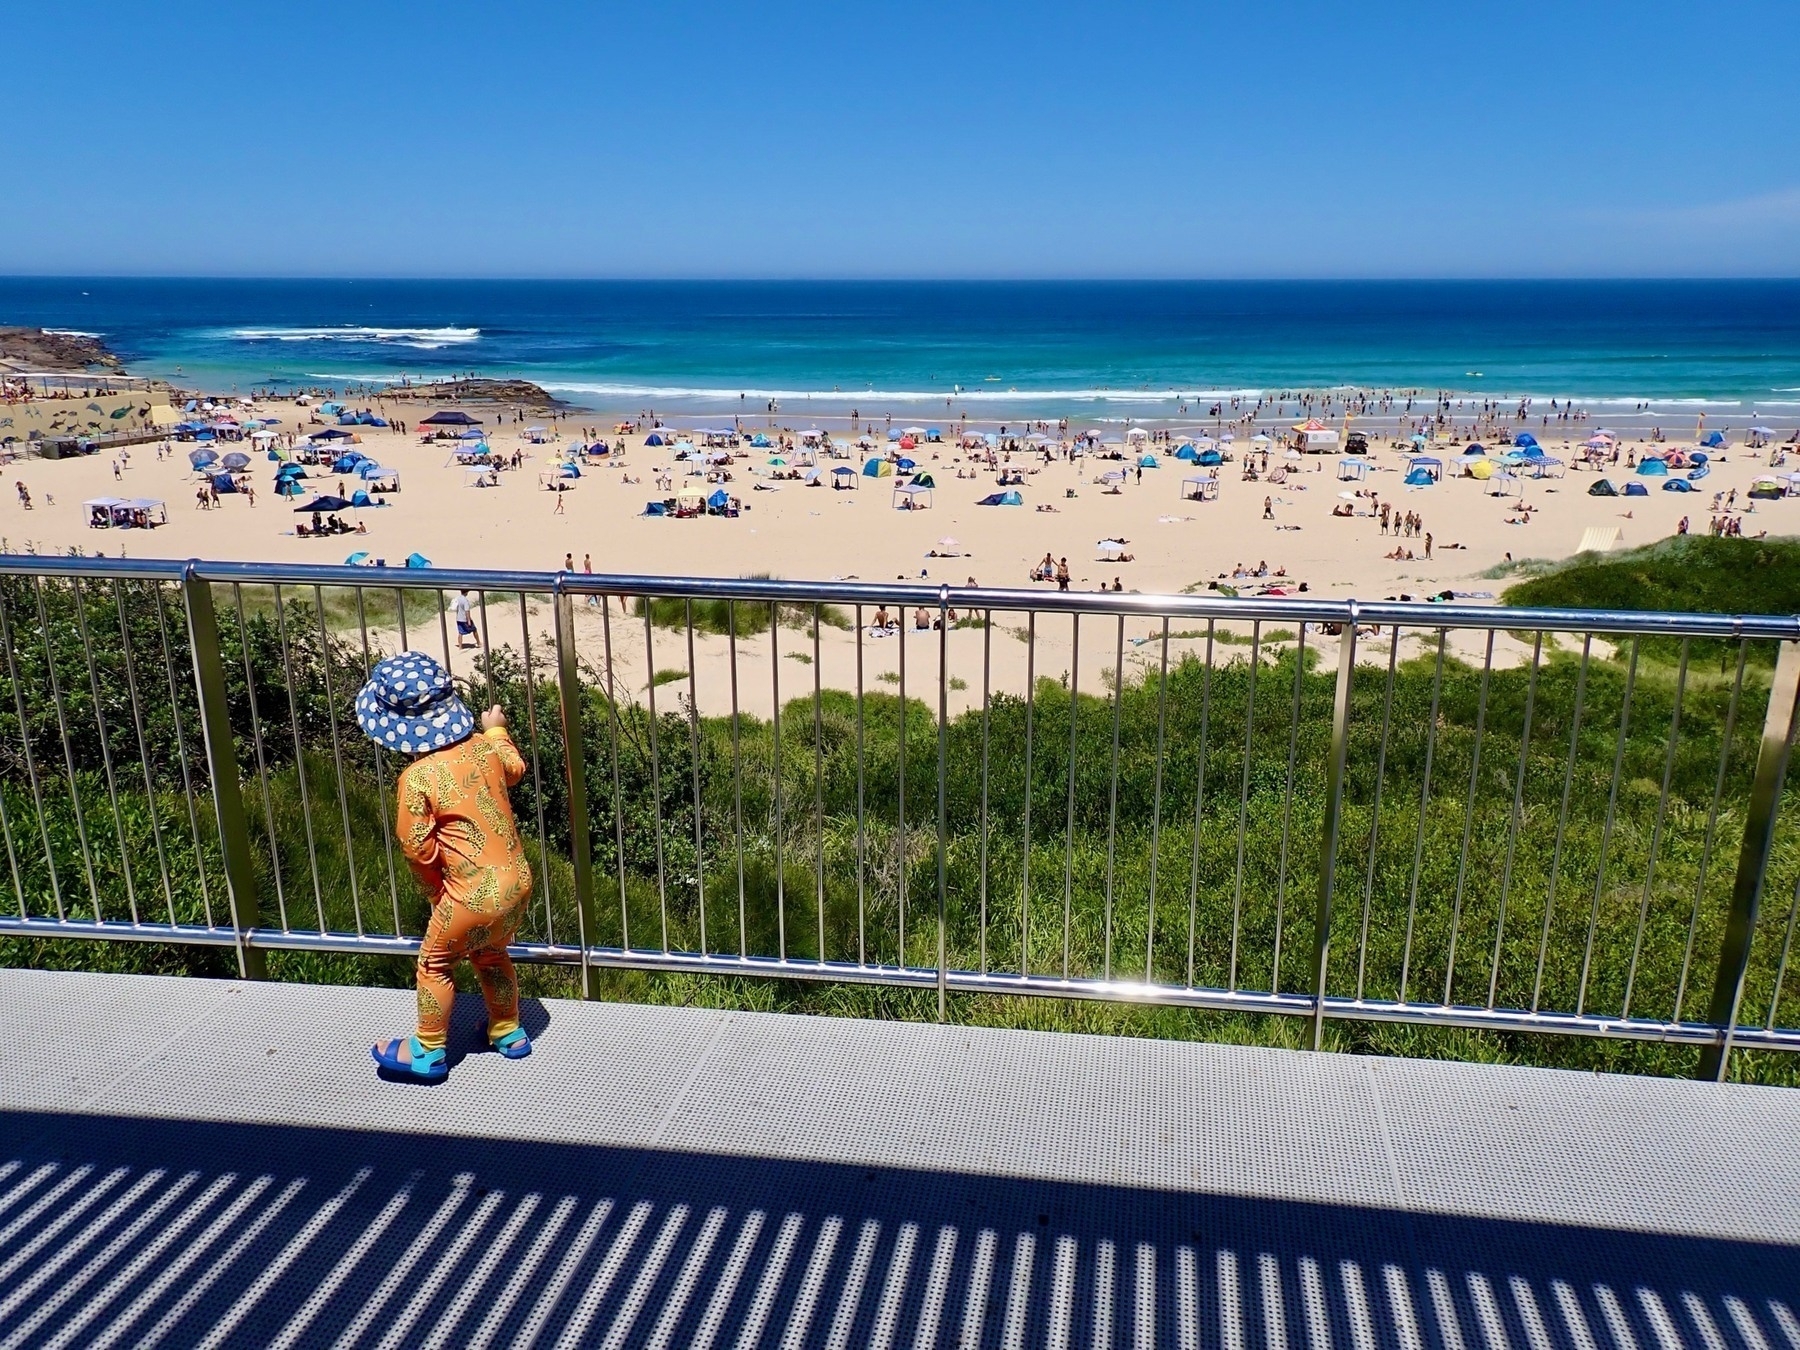 Overlooking Port Kembla Beach and the Tasman Sea from a viewing platform, with a toddler in the foreground